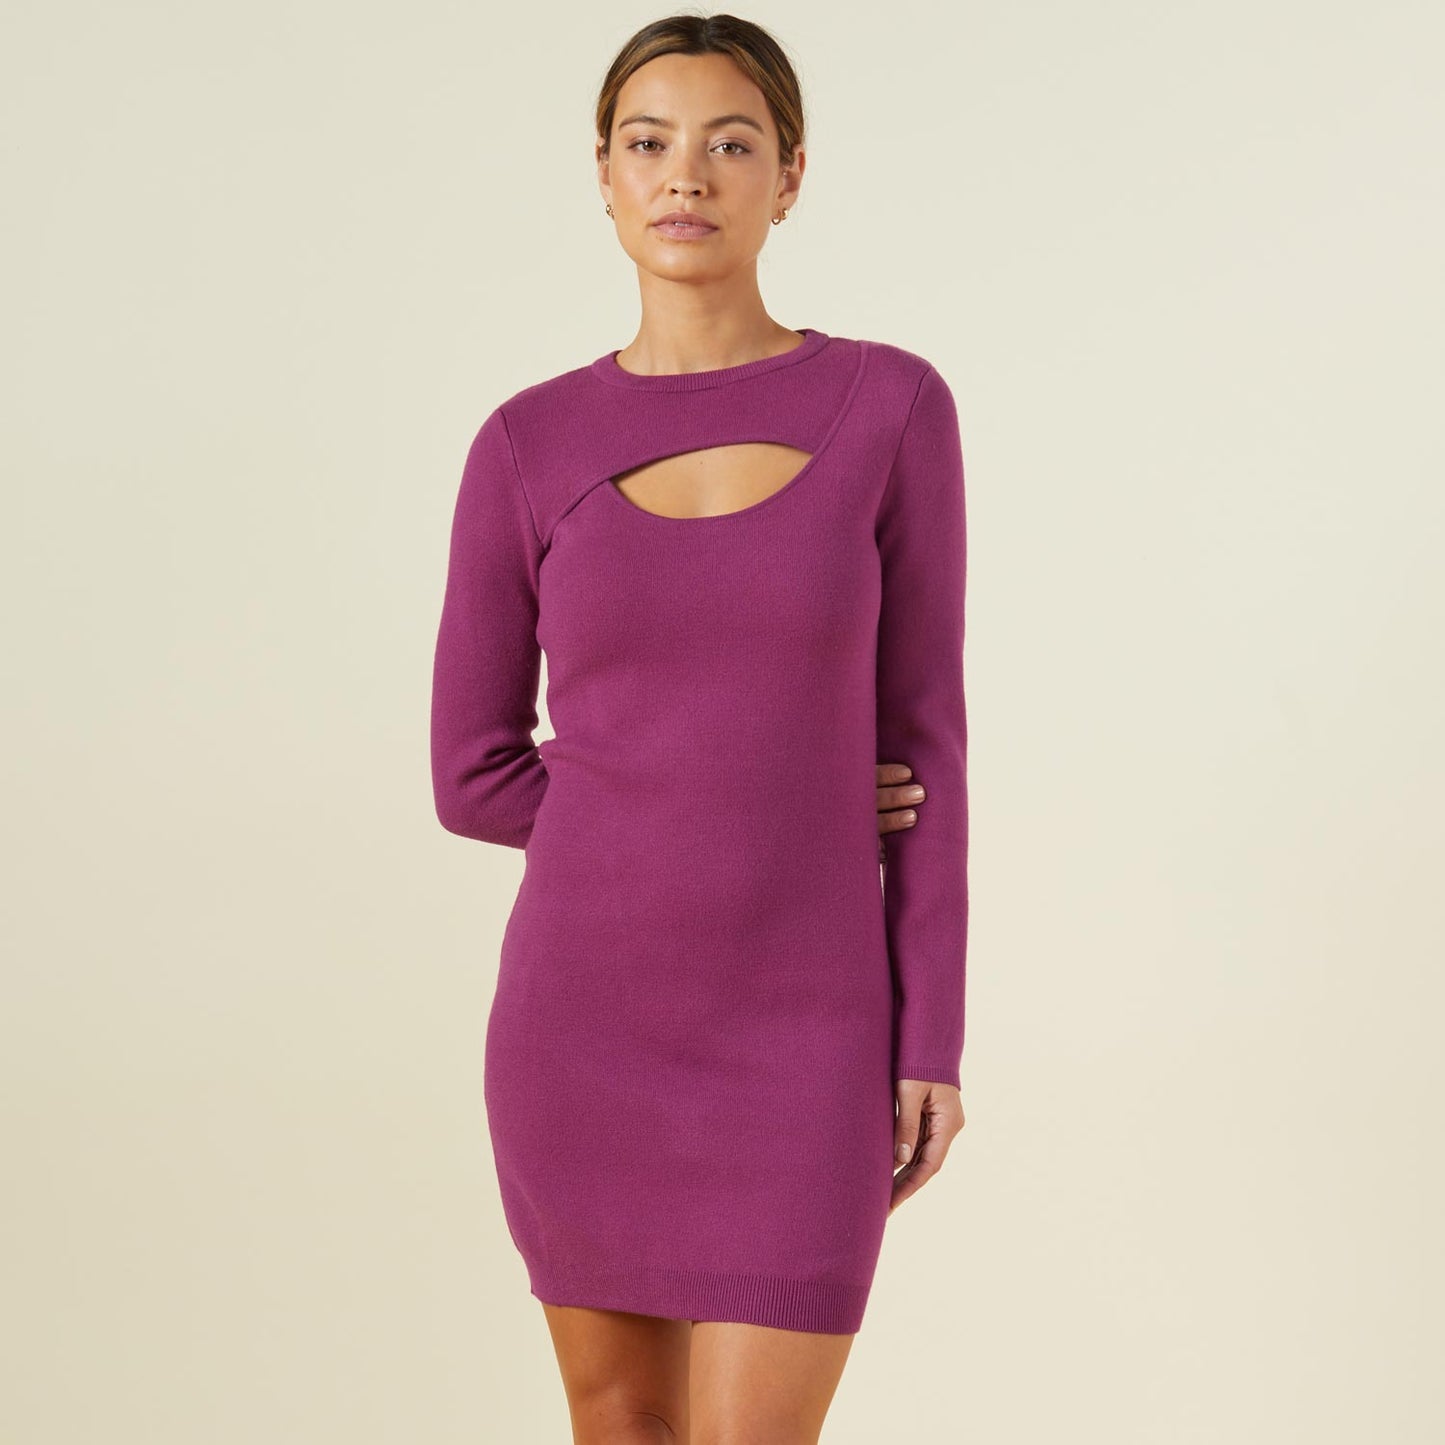 Front view of model wearing the supersoft sweater knit cut out dress in raspberry rose.